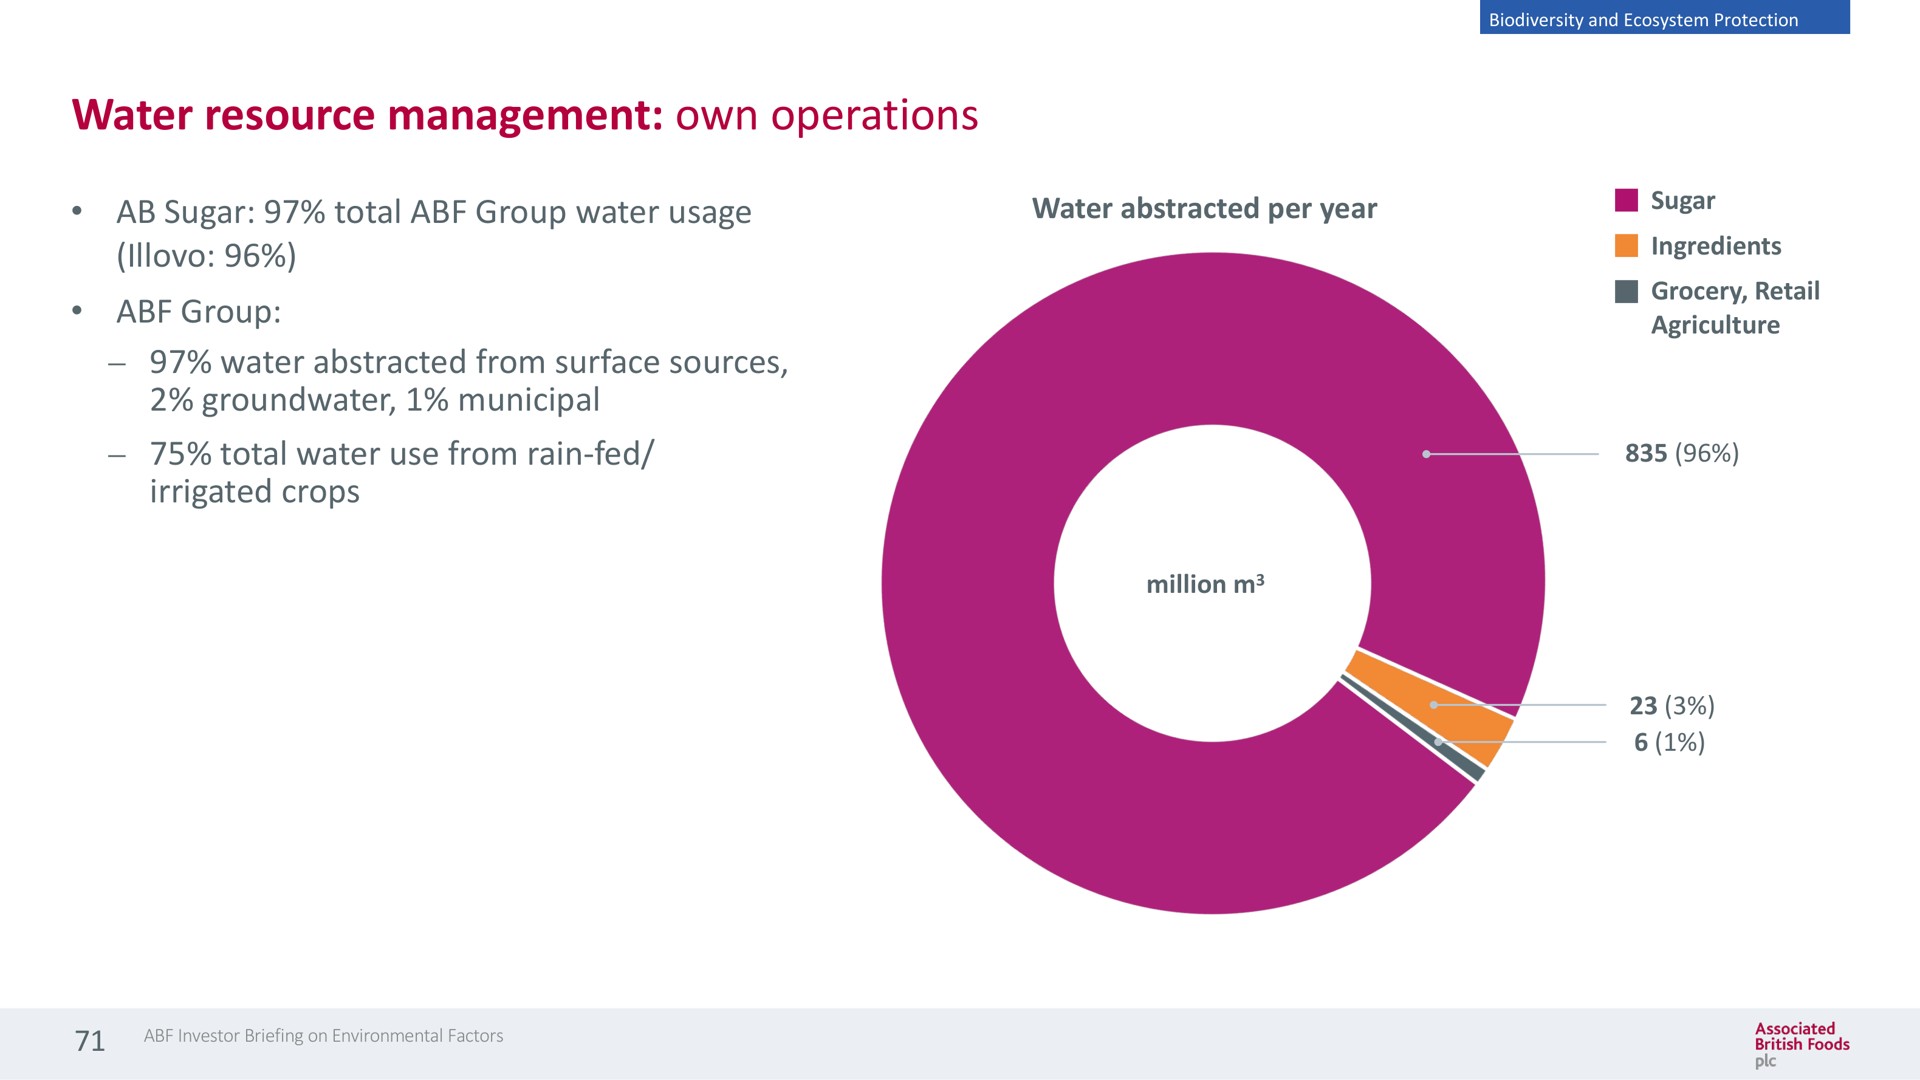 water resource management own operations sugar total group water usage water abstracted per year group water abstracted from surface sources municipal total water use from rain fed irrigated crops ingredients | Associated British Foods